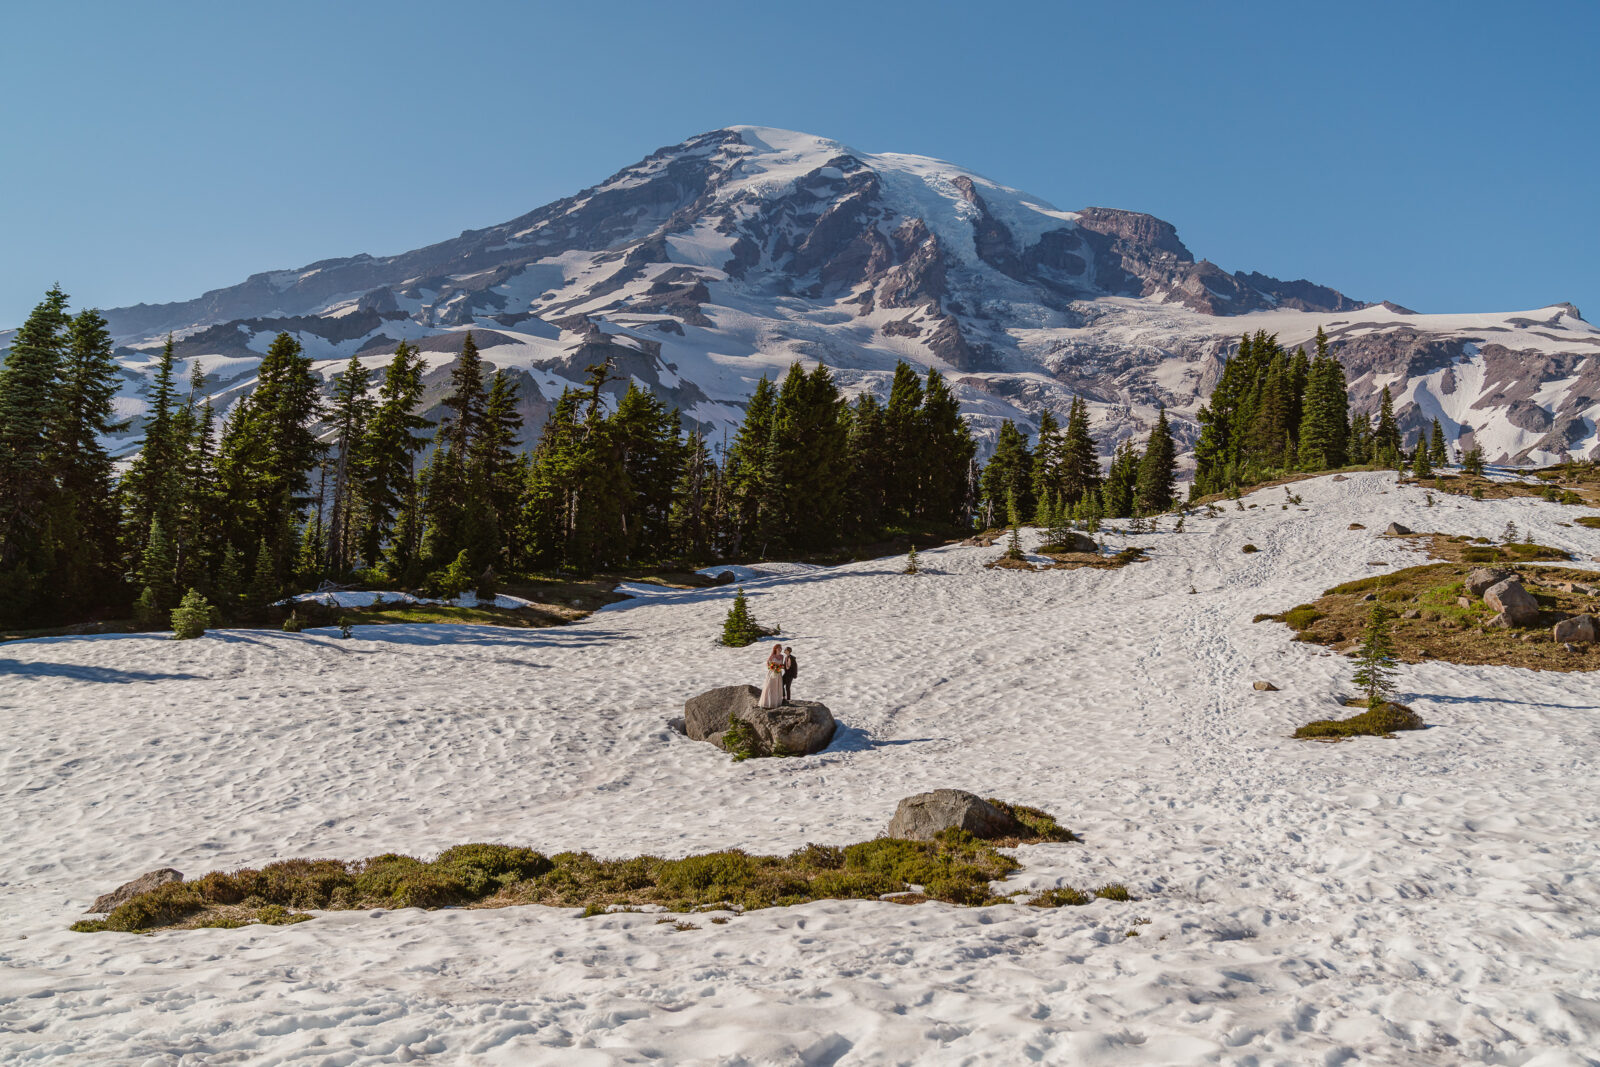 When planning an elopement at Mount Rainier National Park, plan for snow all year long.